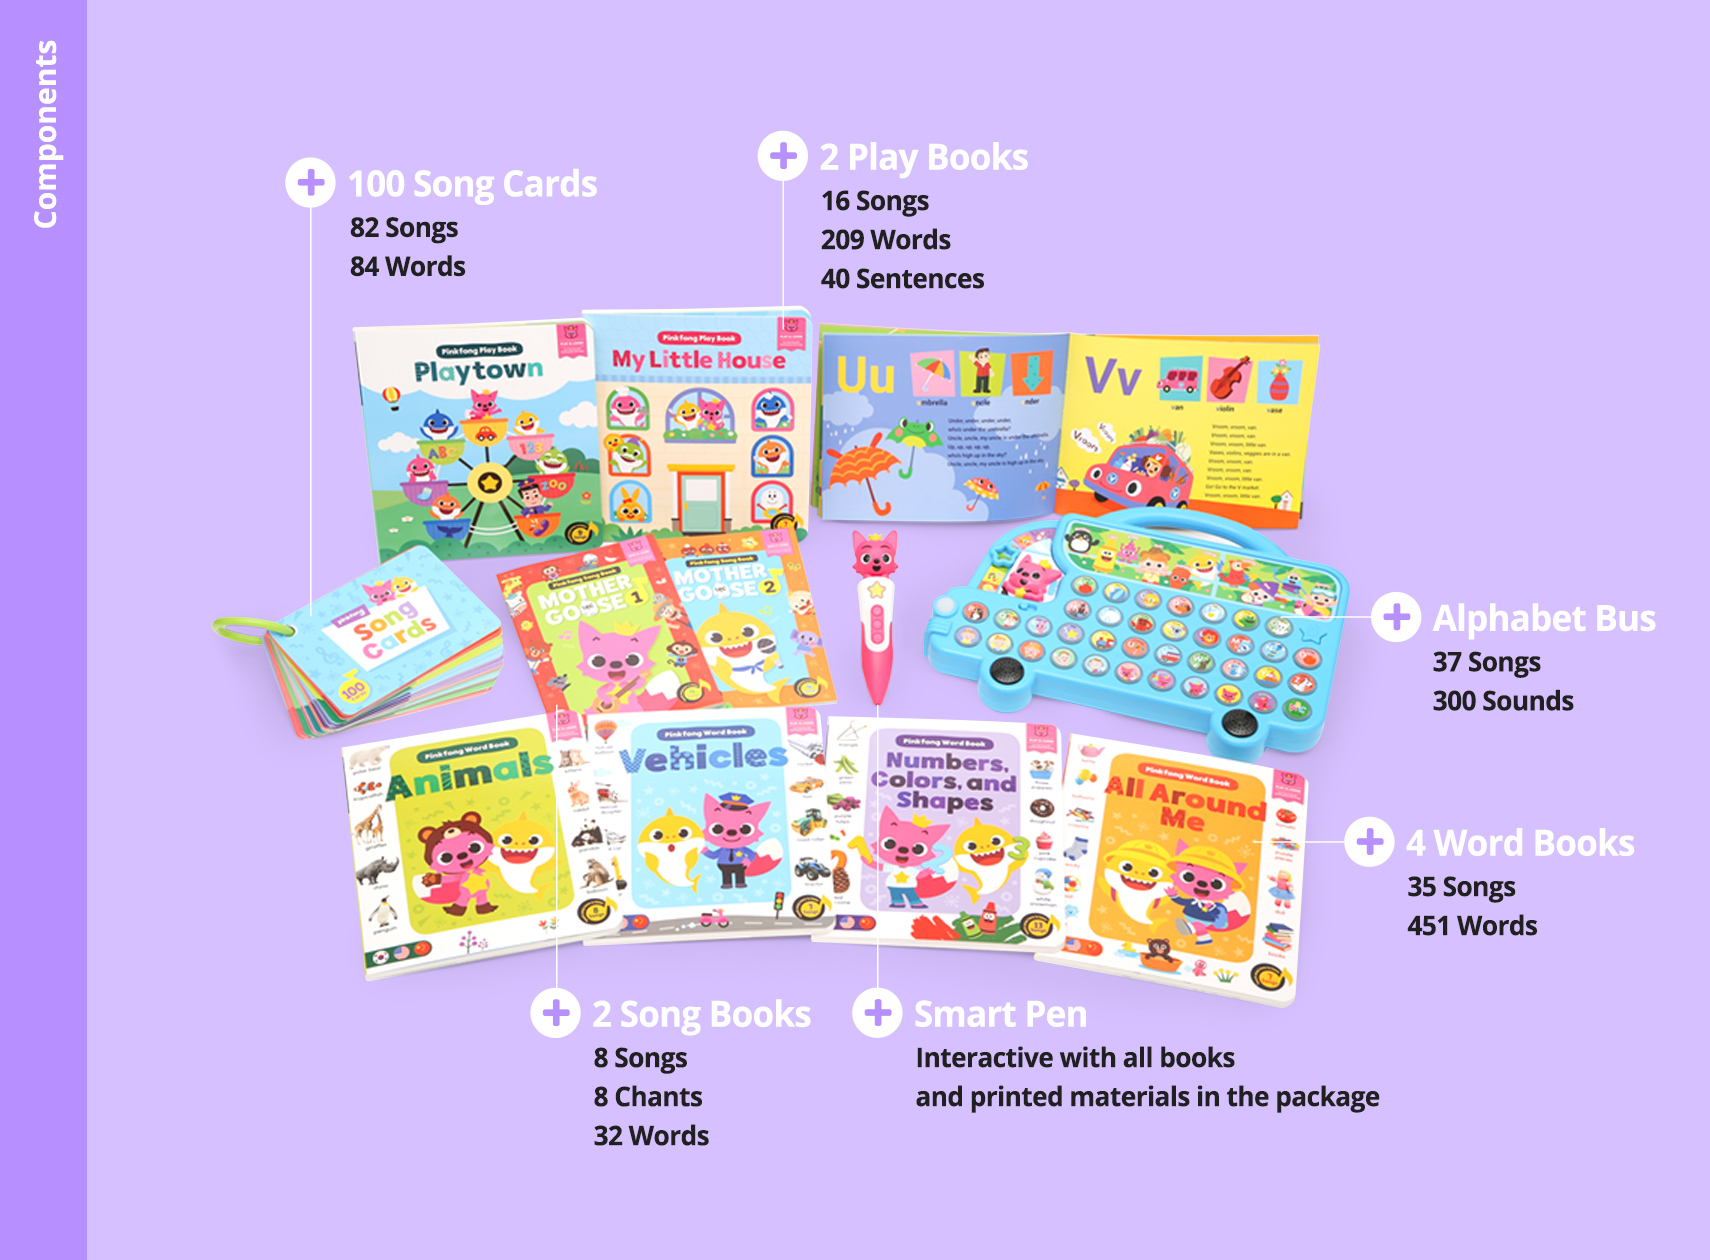 Components: 100 Song Cards, 2 Play Books, Alphabet Bus, 4 Word Books, 2 Song Books, Smart Pen